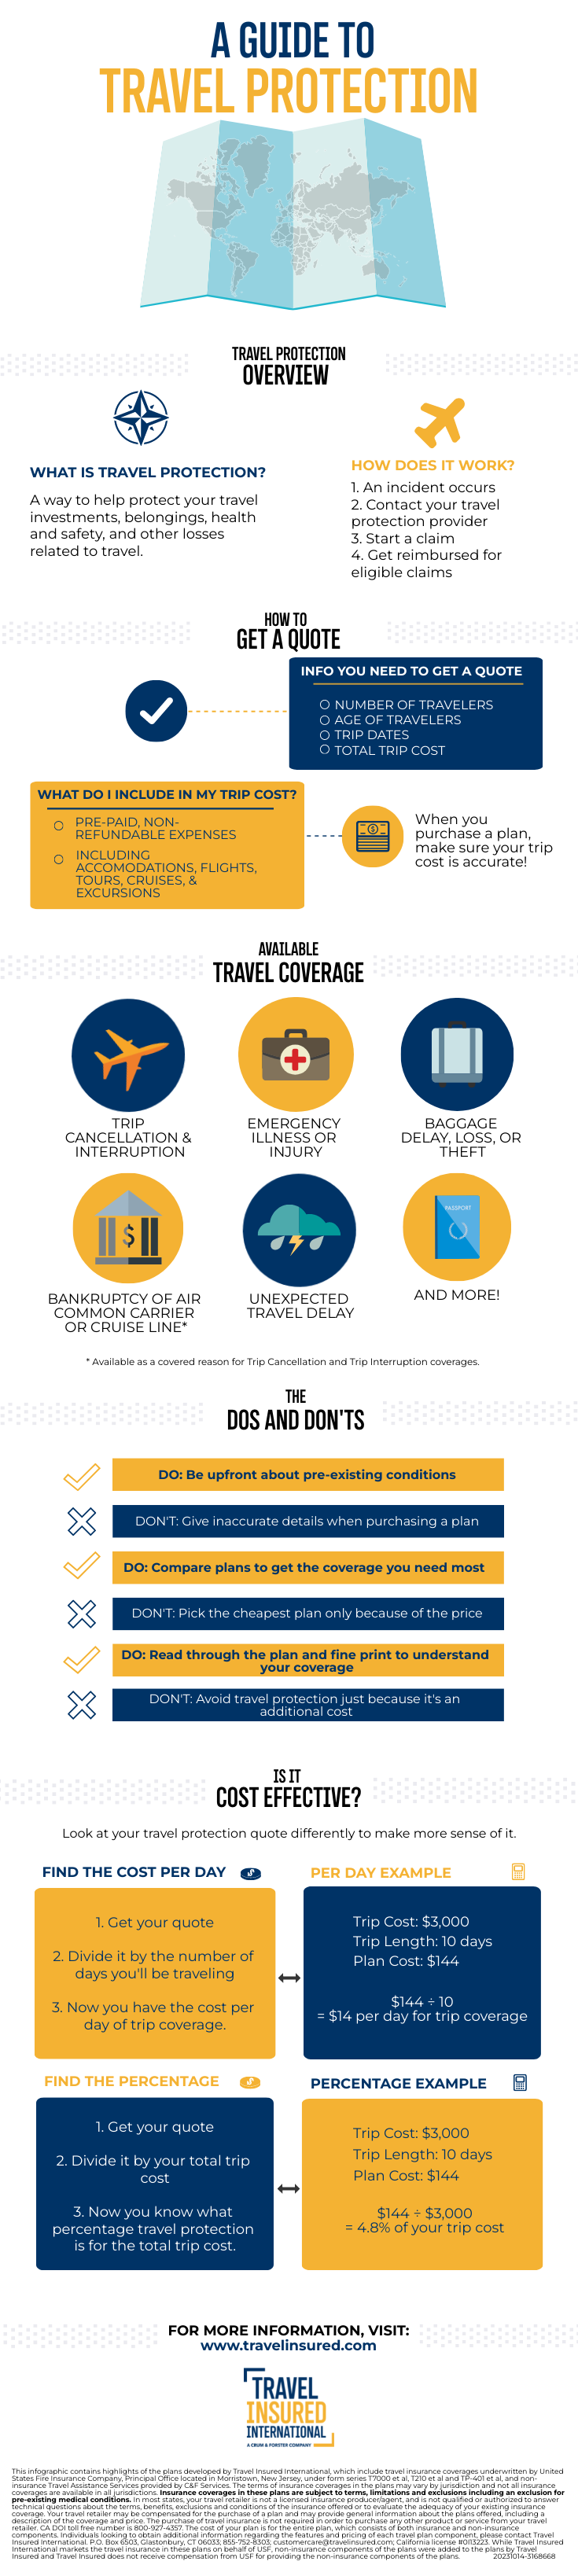 Infographic: Guide to Travel Protection